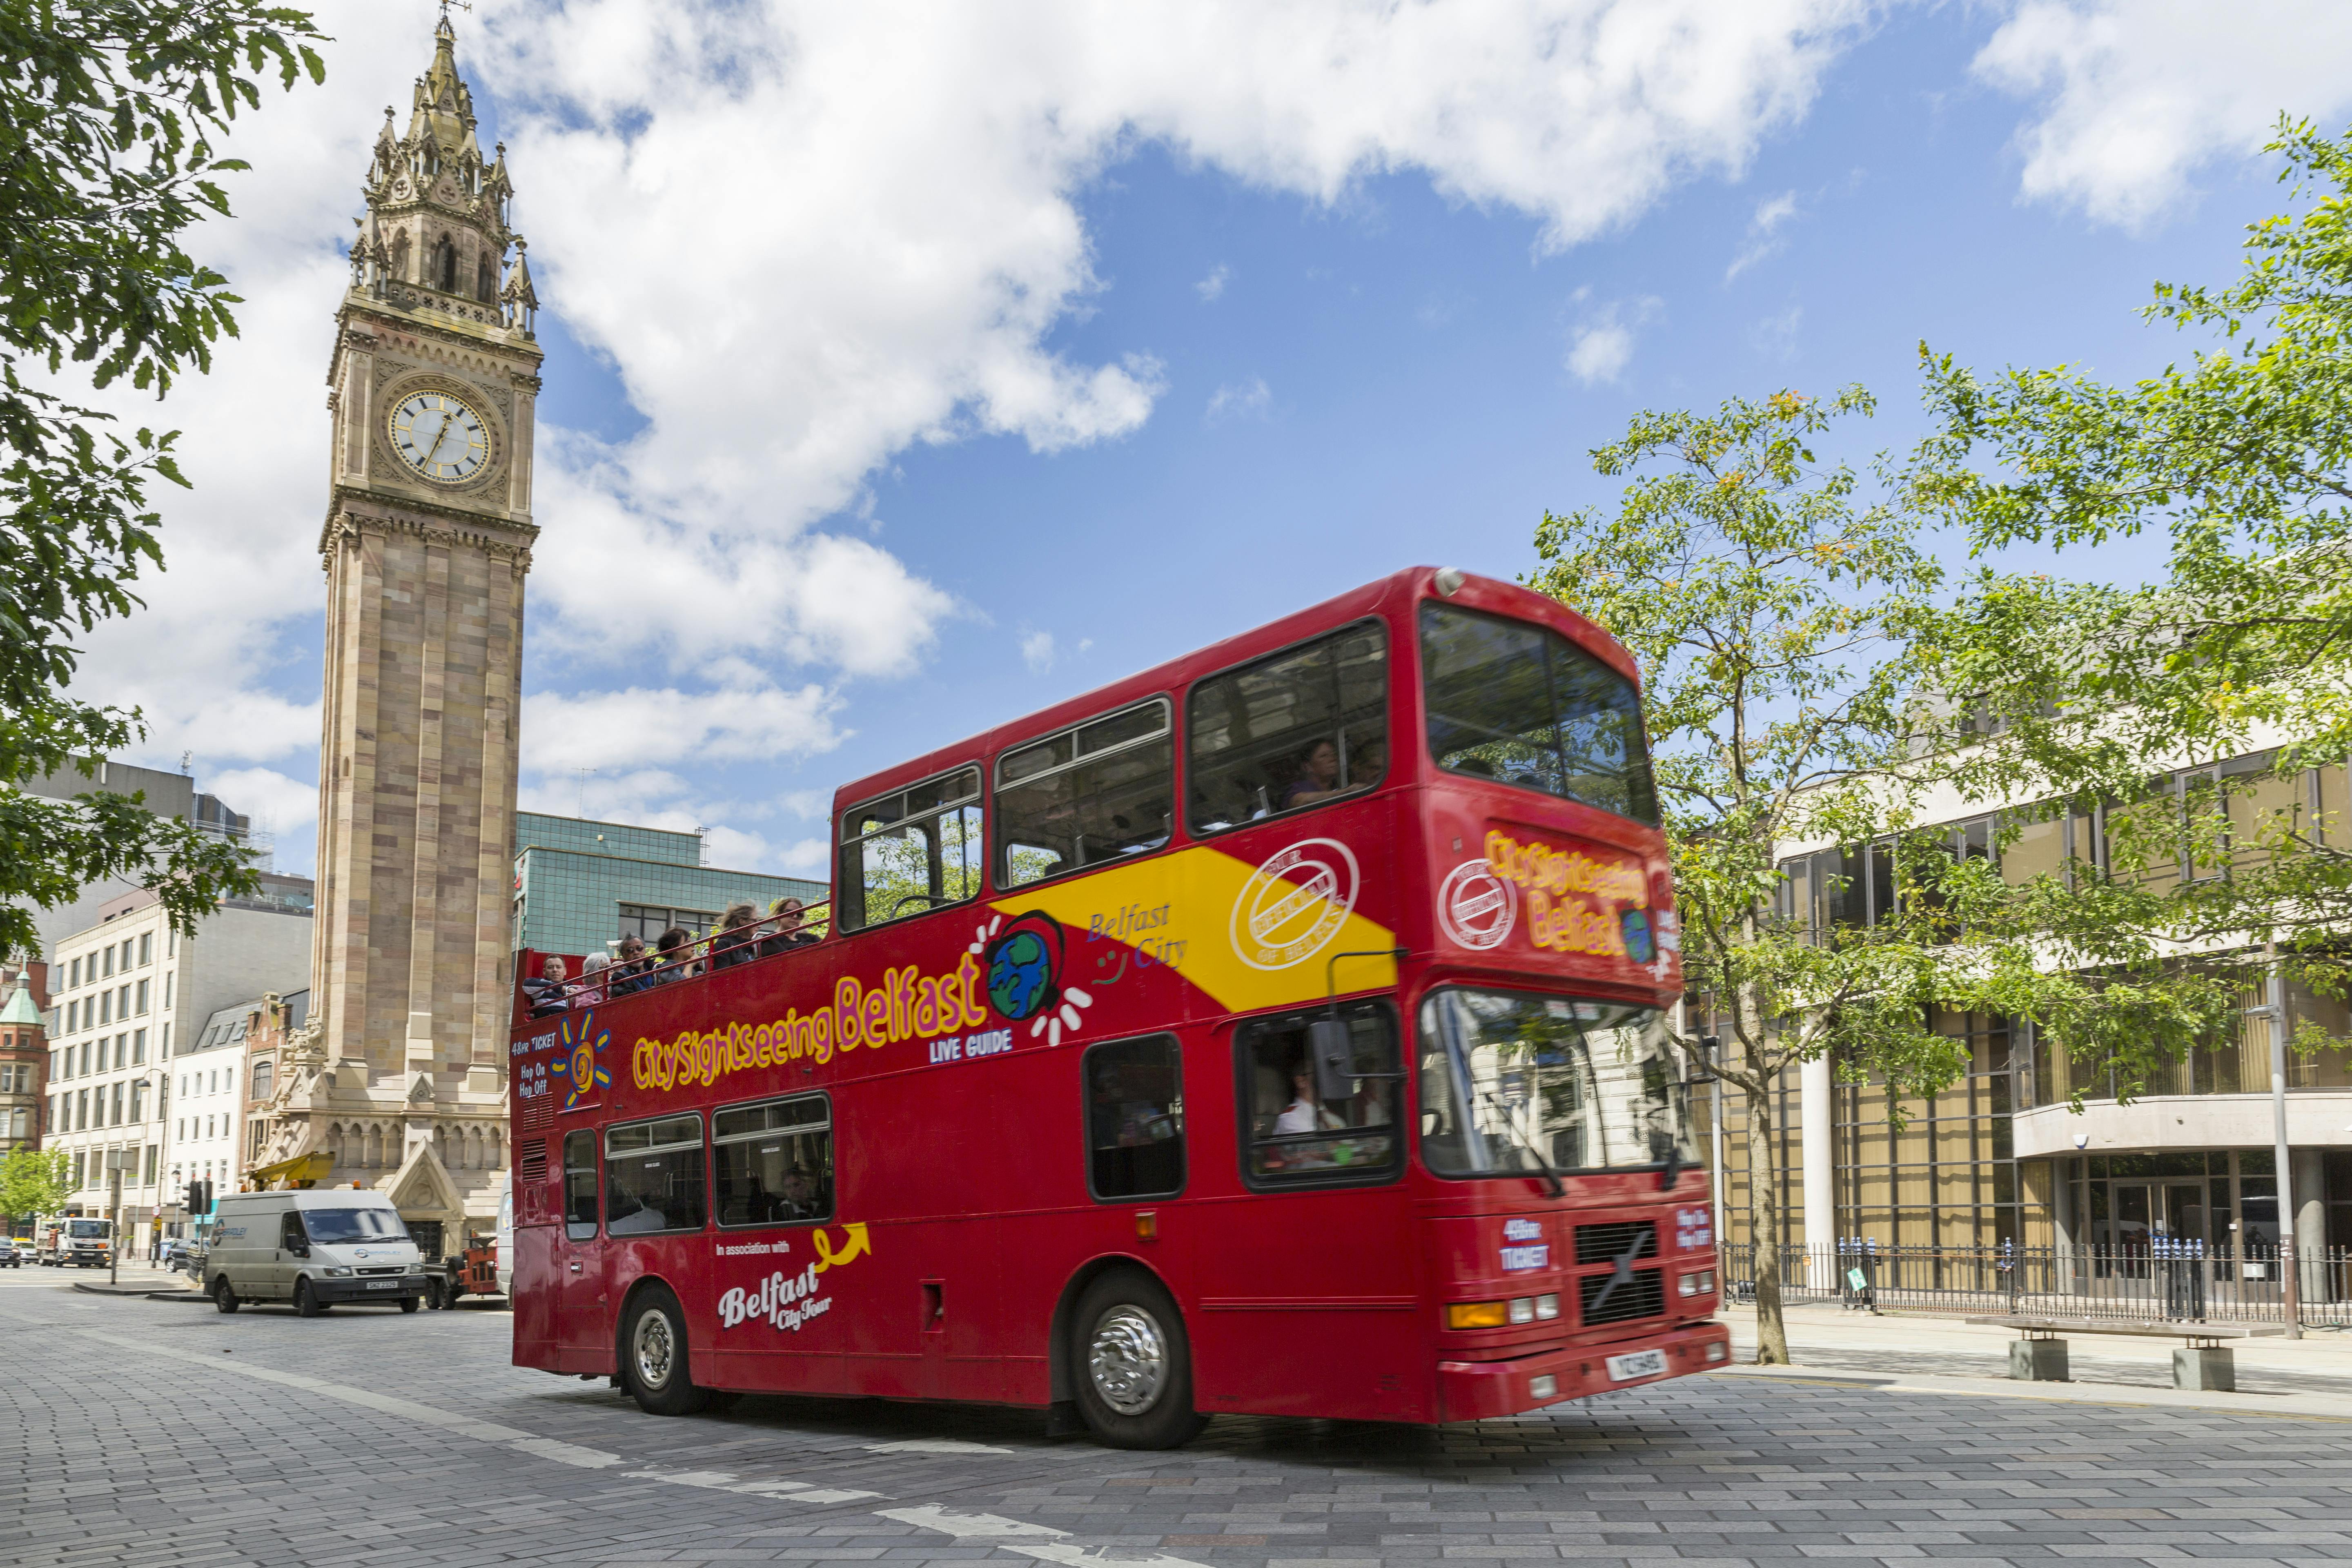 City Sightseeing hop-on hop-off bus tour of Belfast